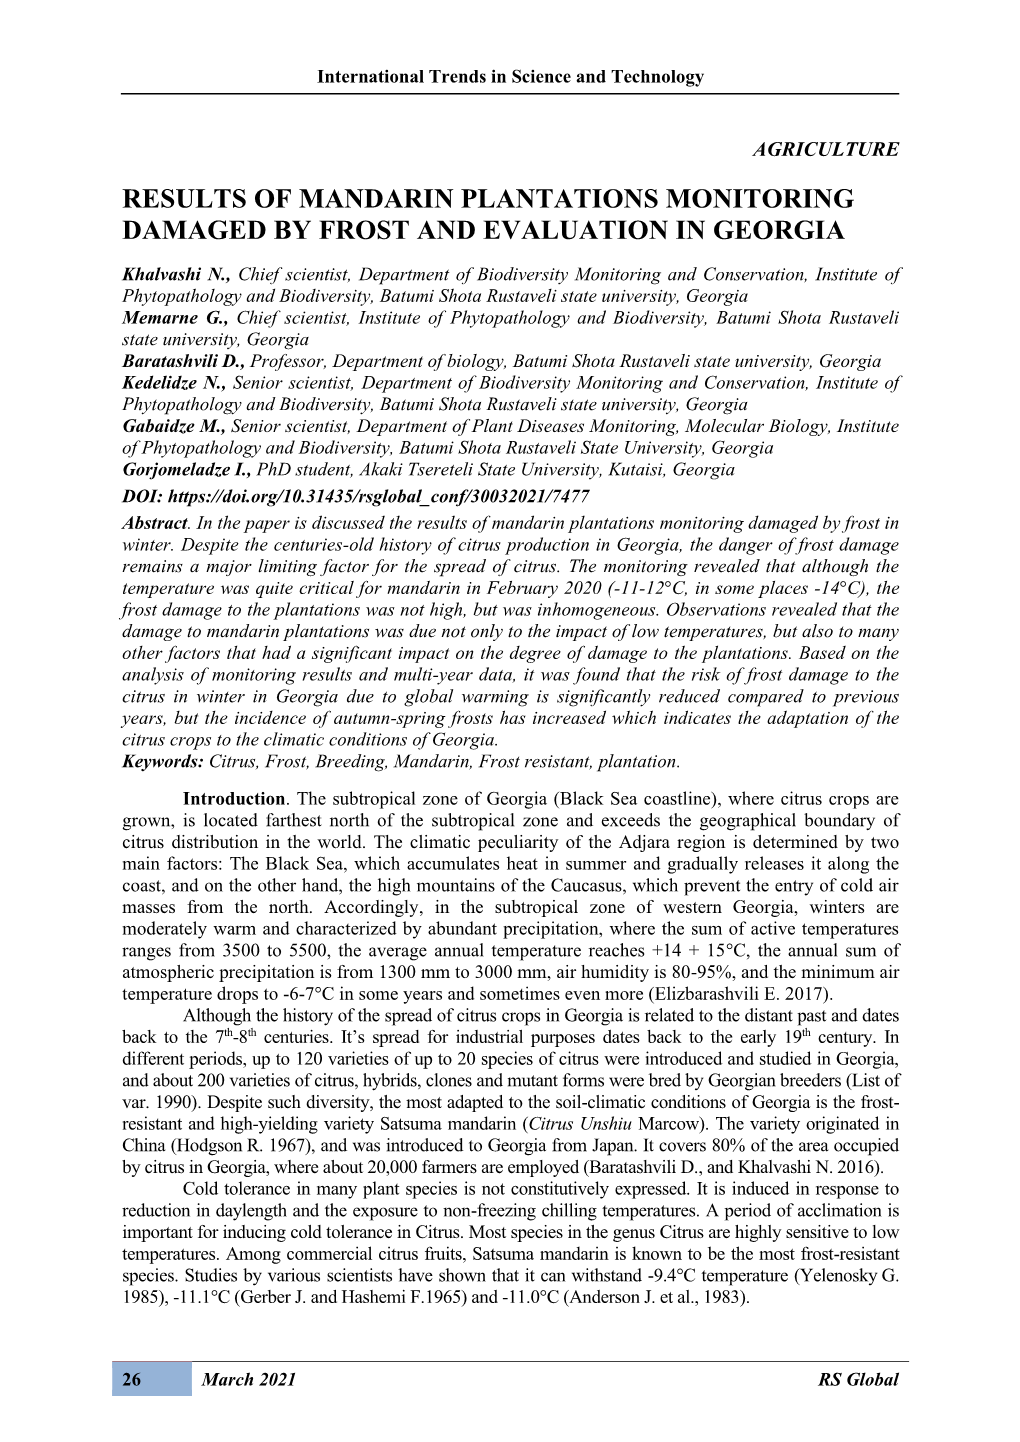 Results of Mandarin Plantations Monitoring Damaged by Frost and Evaluation in Georgia